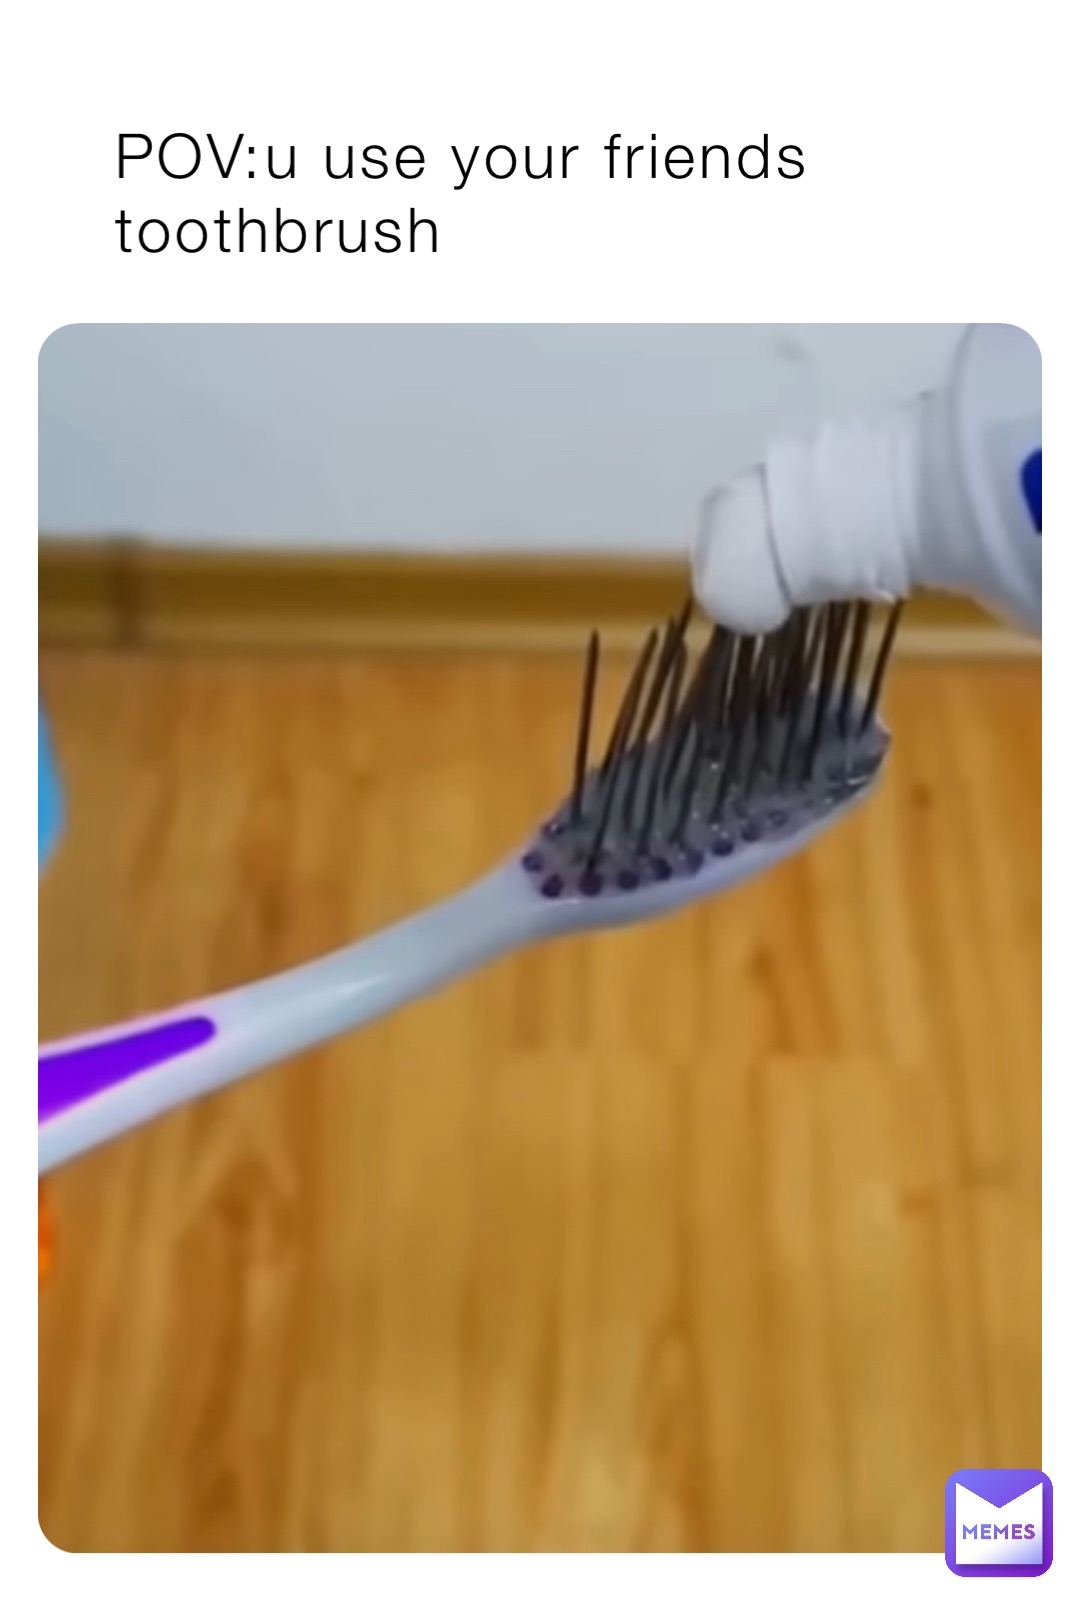 POV:u use your friends toothbrush